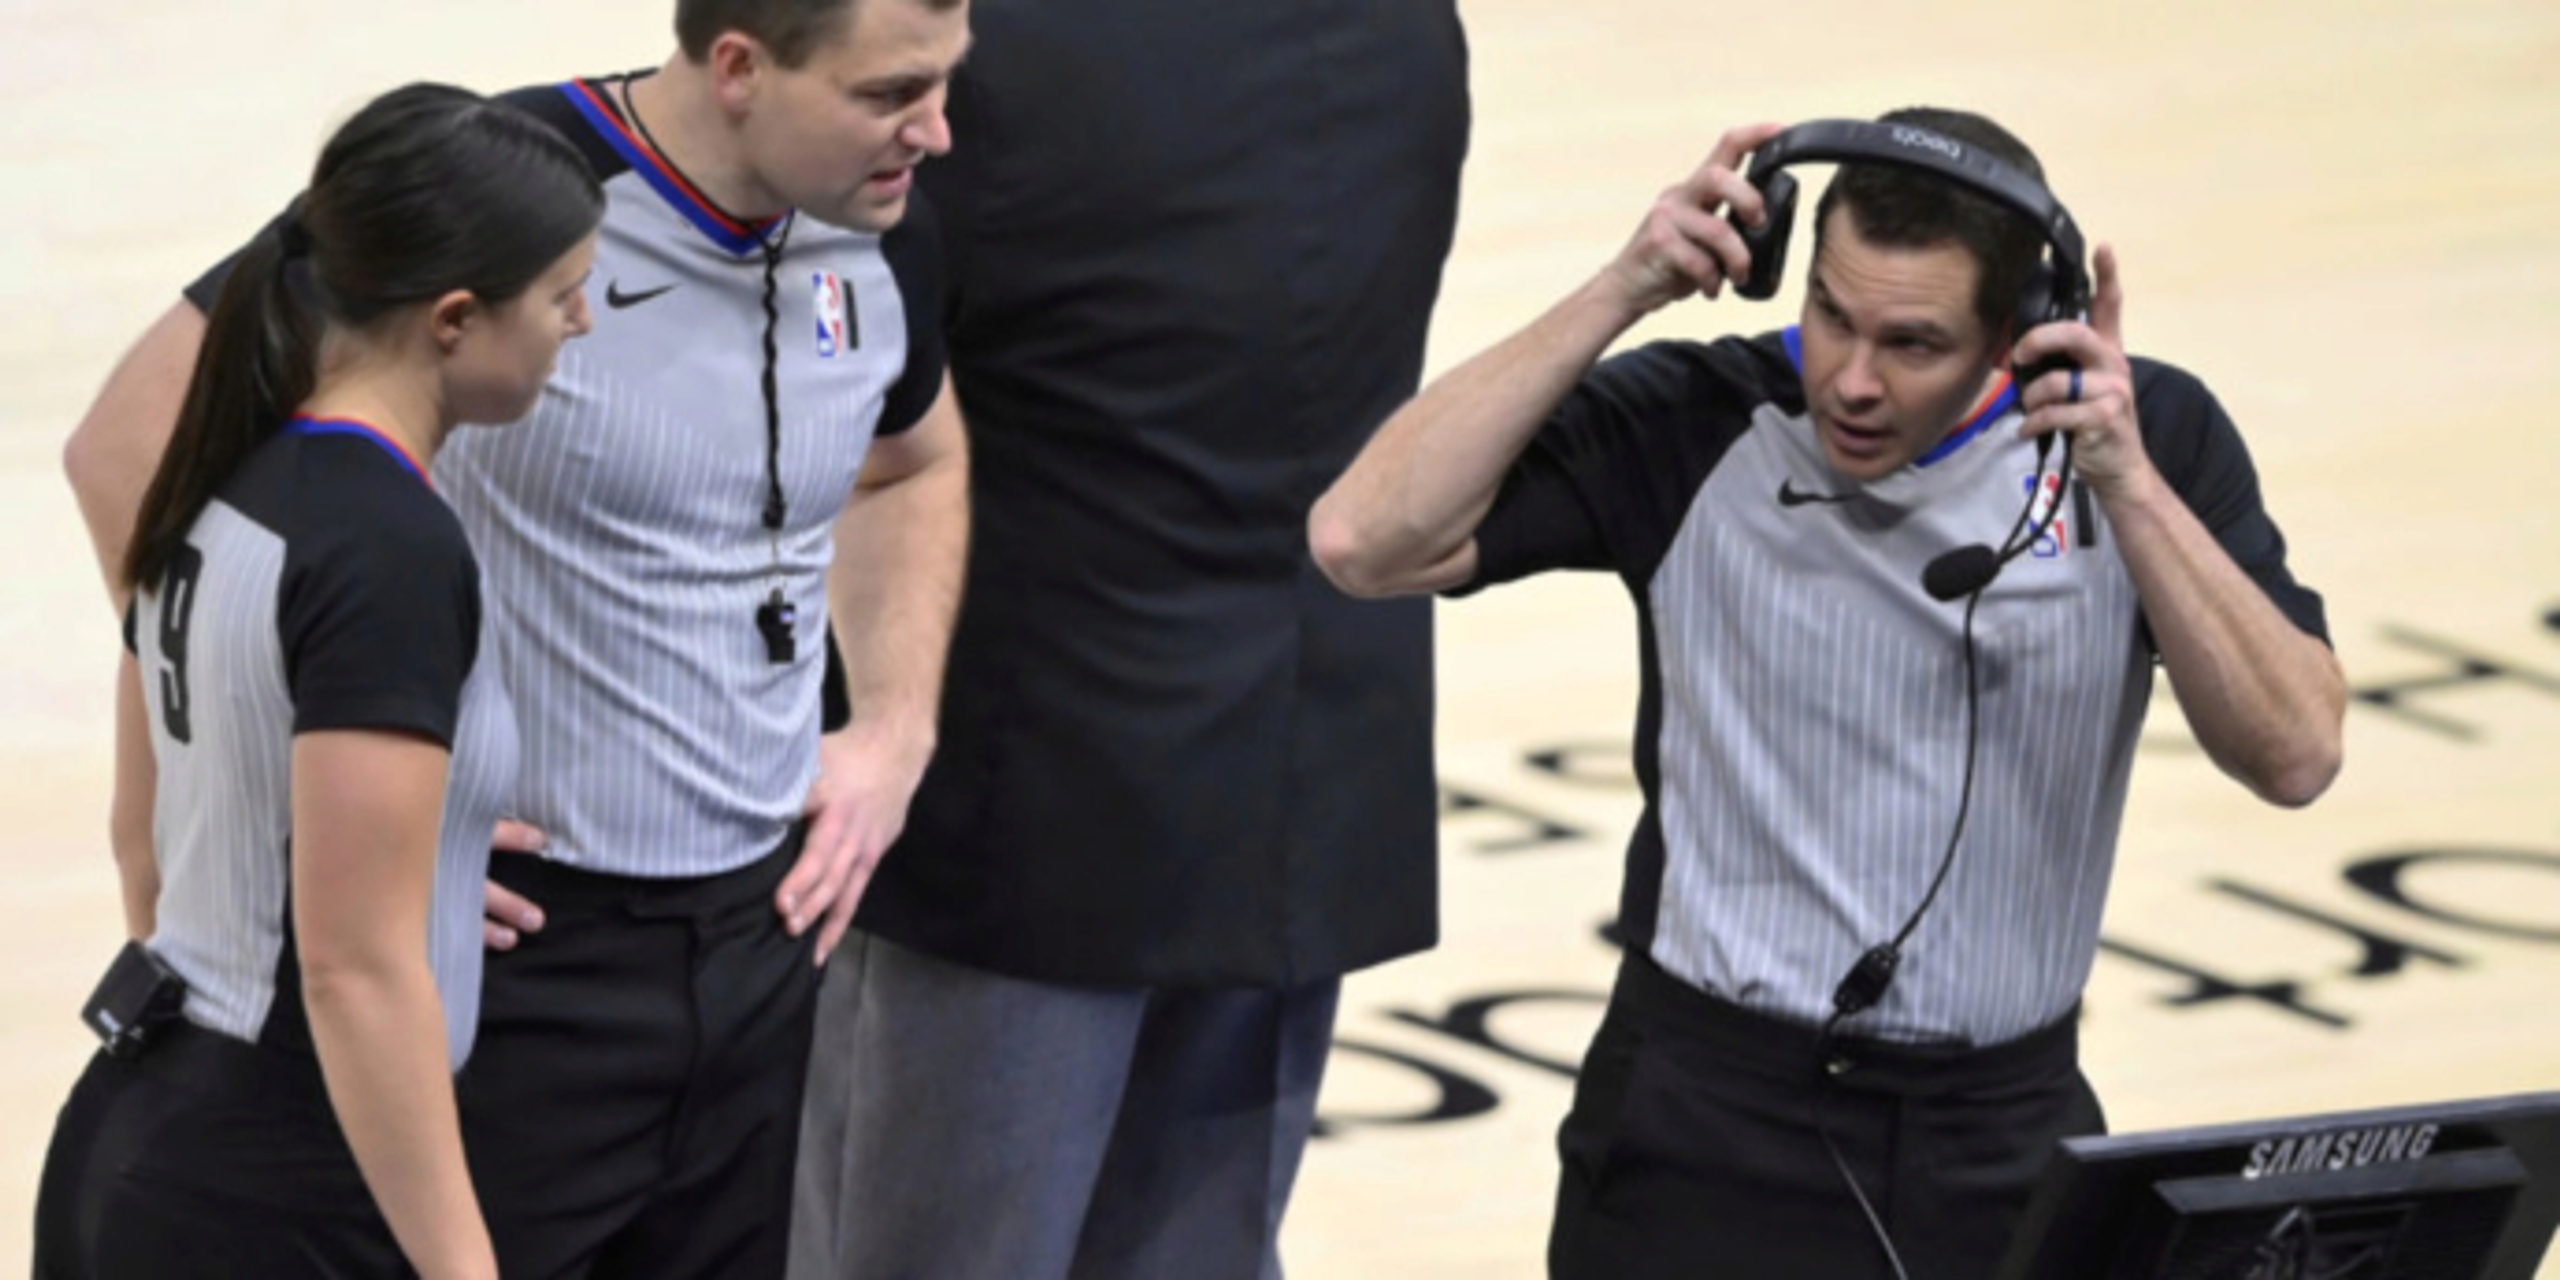 Instant replay on demand: How DVSport is impacting the NBA